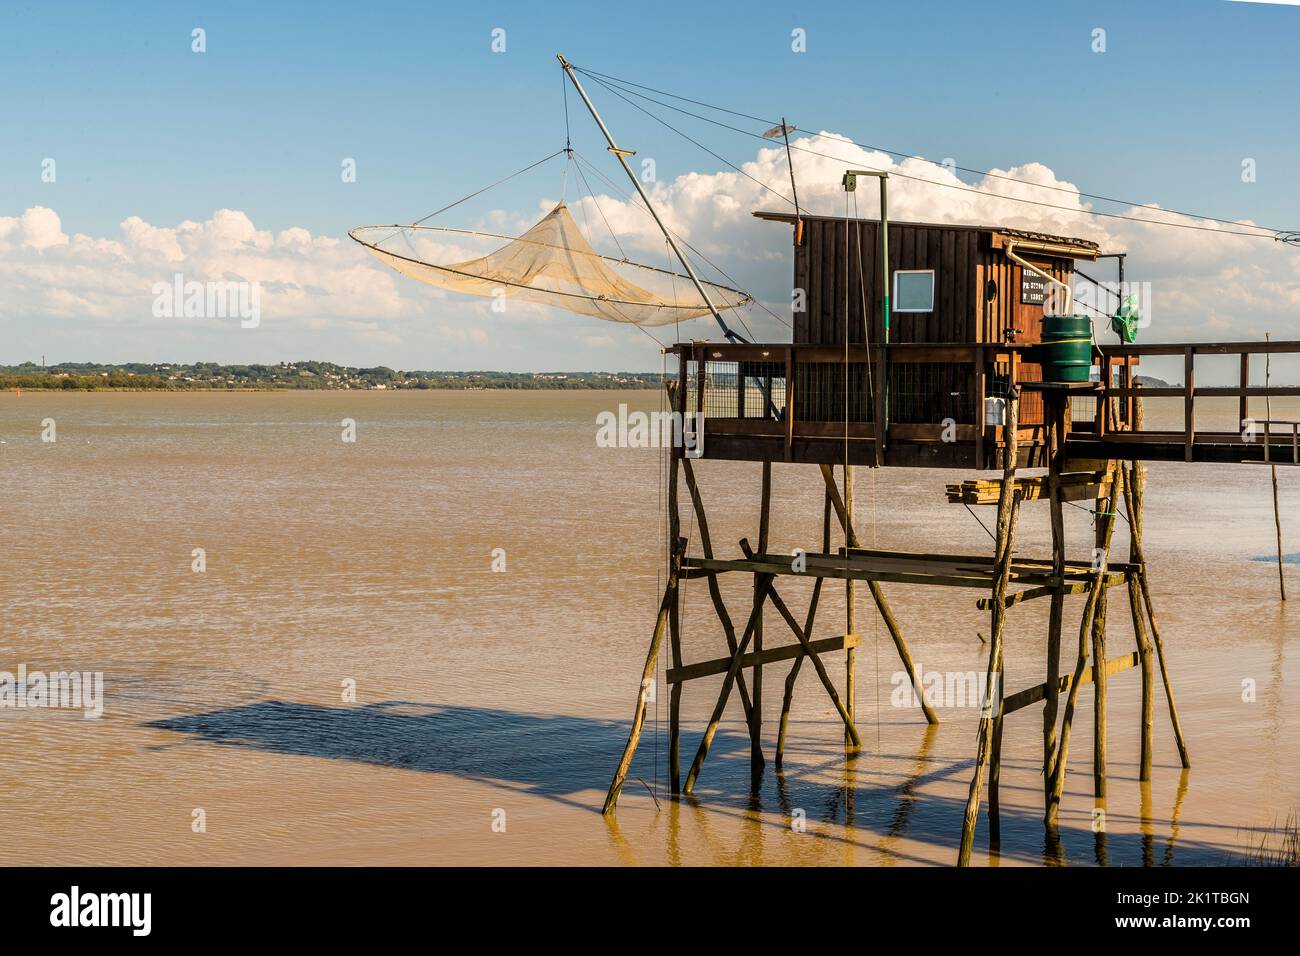 Le Carrelet is the name given to the fishermen's huts on stilts at the mouth of the Gironde River. Lesparre-Médoc, France Stock Photo